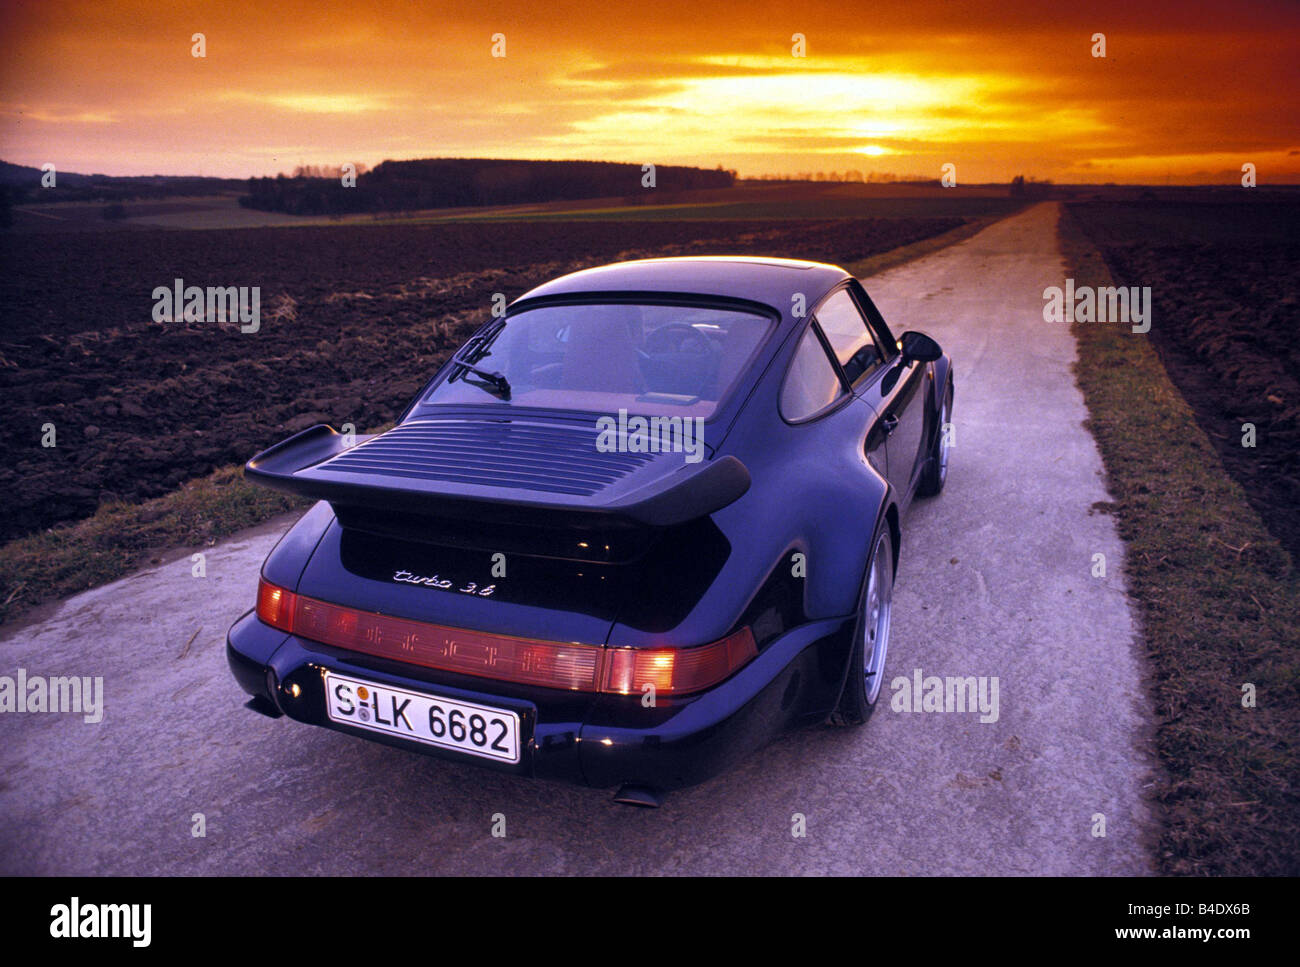 Car, Porsche Turbo 3.6, model year 1976, roadster, coupe, black, diagonal from the back, rear view, country road, Sunset, landsa Stock Photo